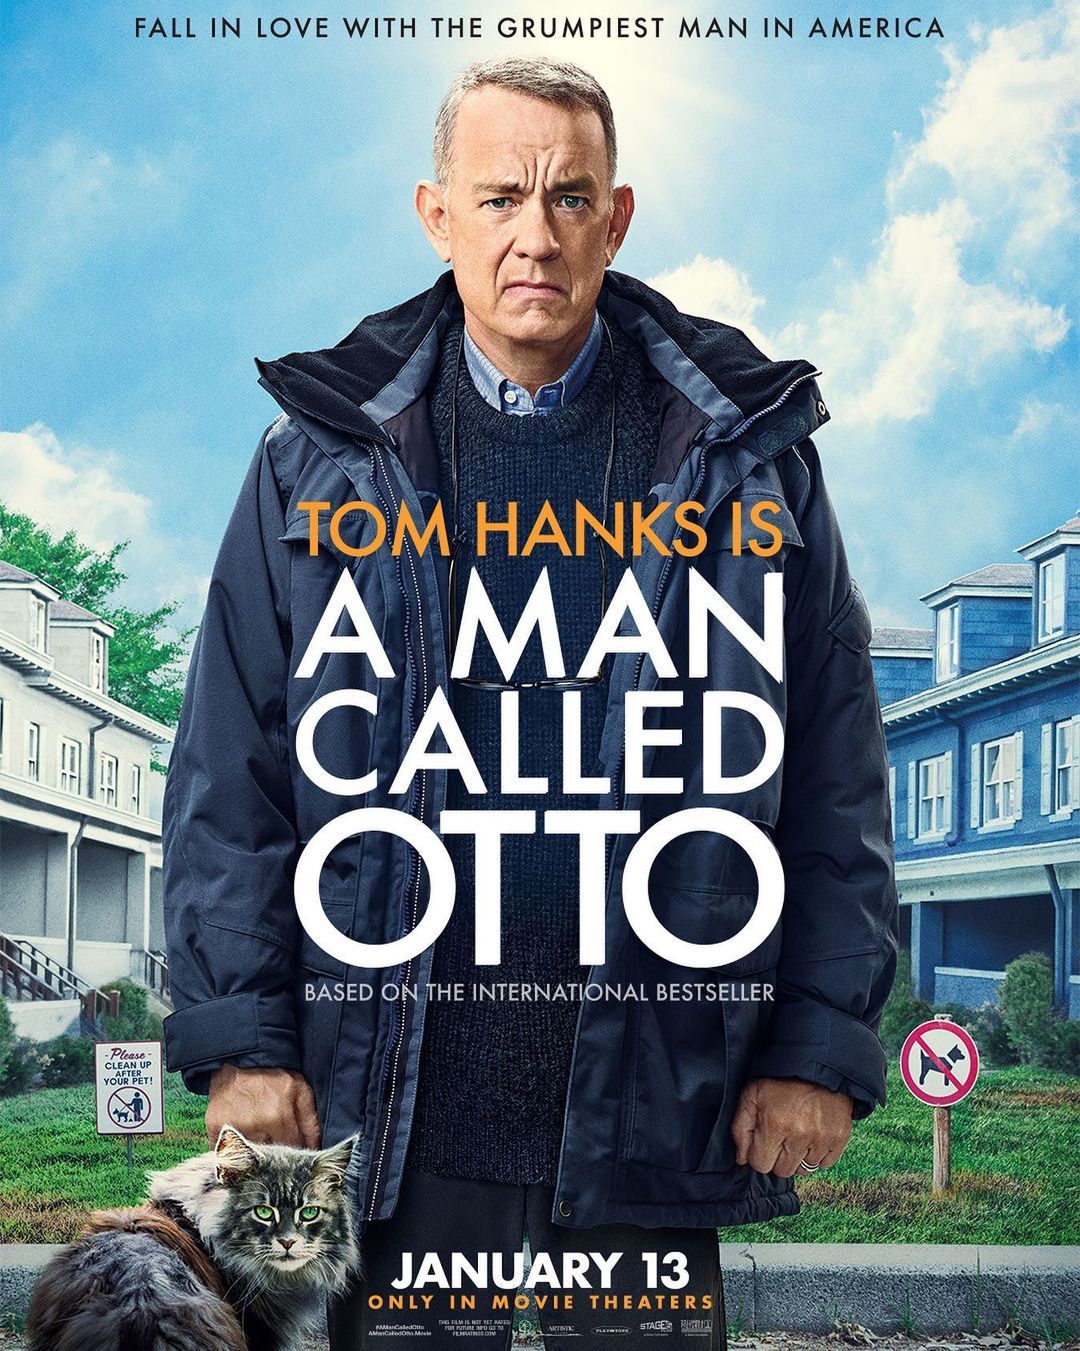 A Man Called Otto/ Foto : Instagram SonyPictures